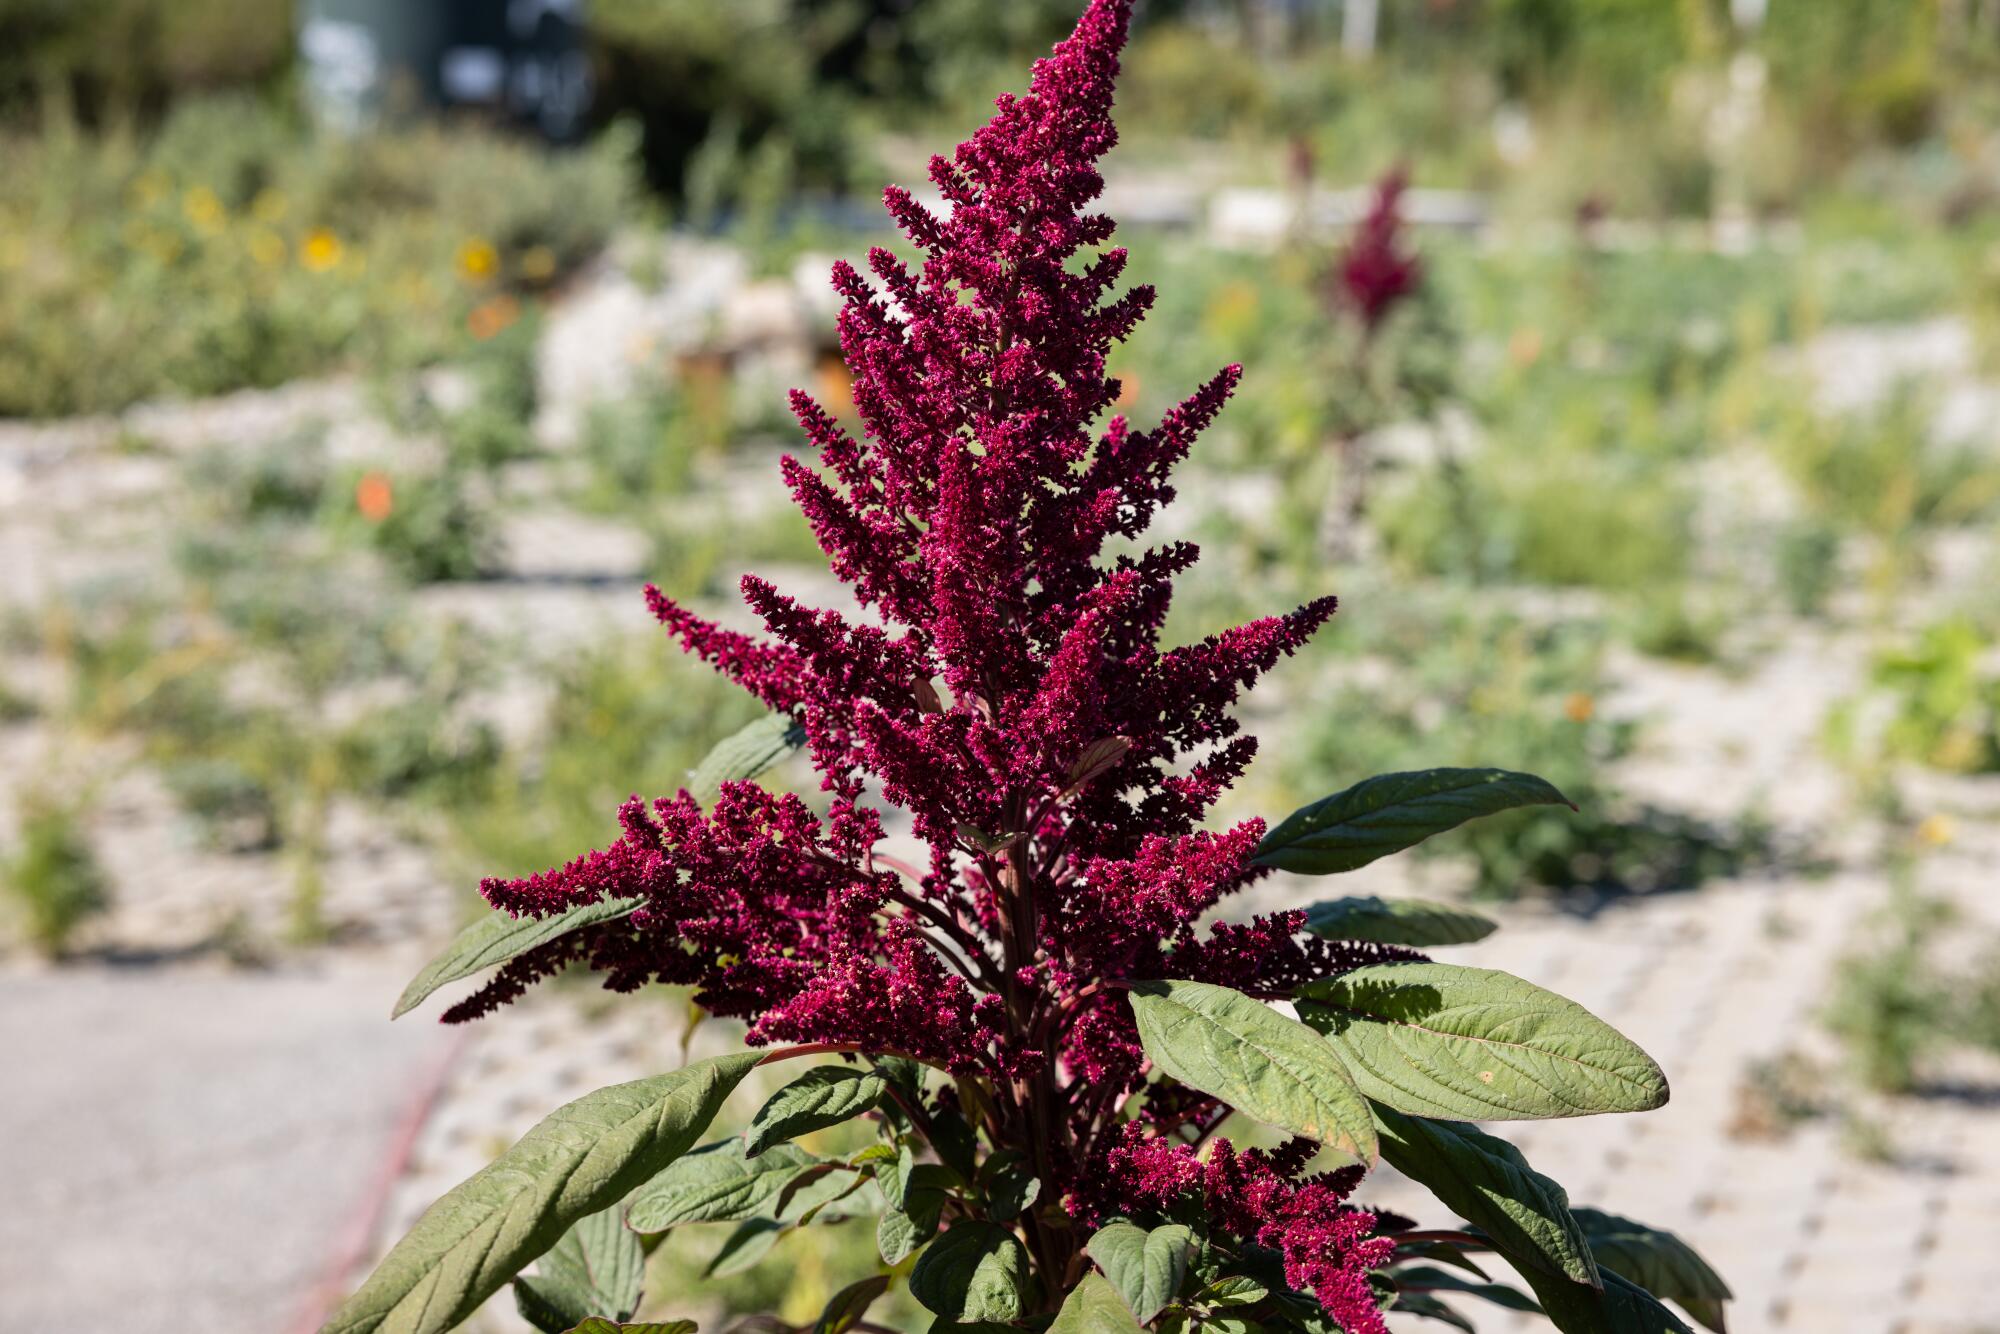 A bright purple blooming amaranth grows in former industrial site on the banks of the L.A. River.